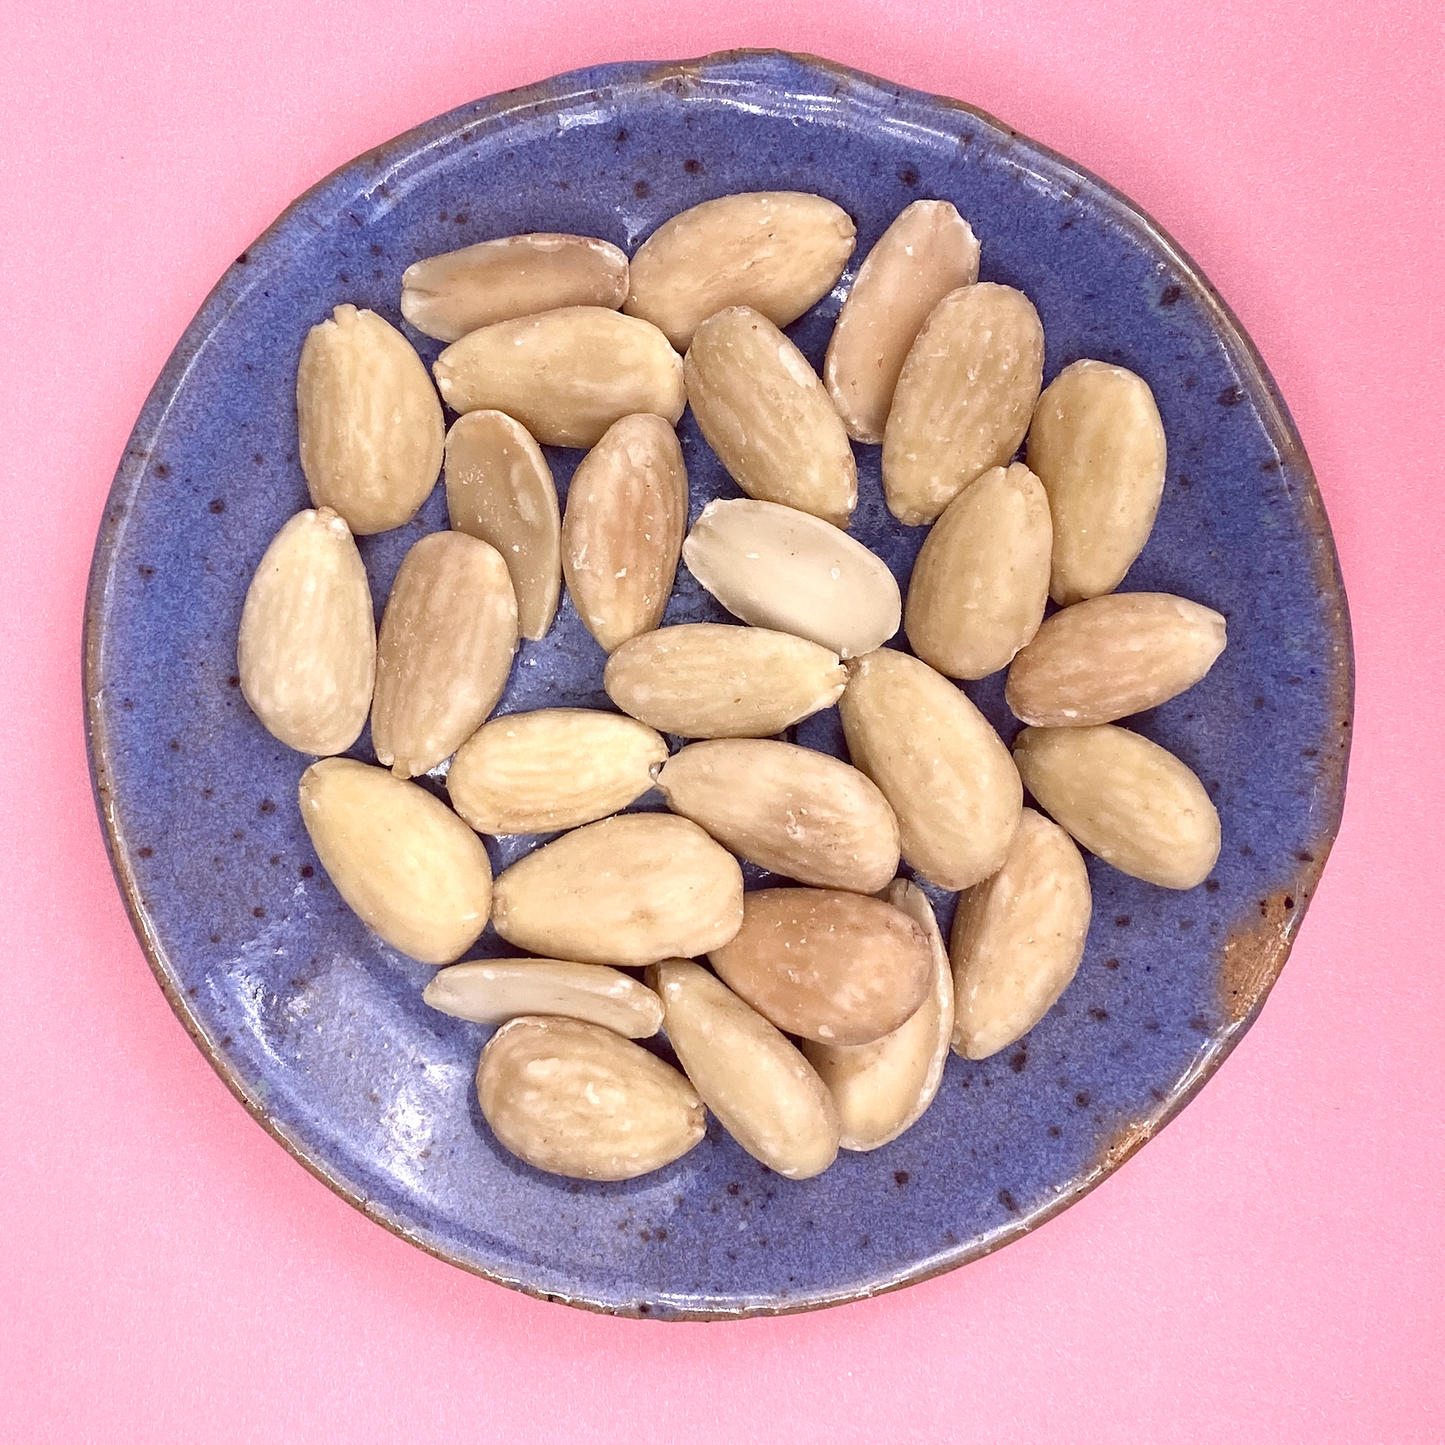 Almonds - Blanched, California Grown, Organic